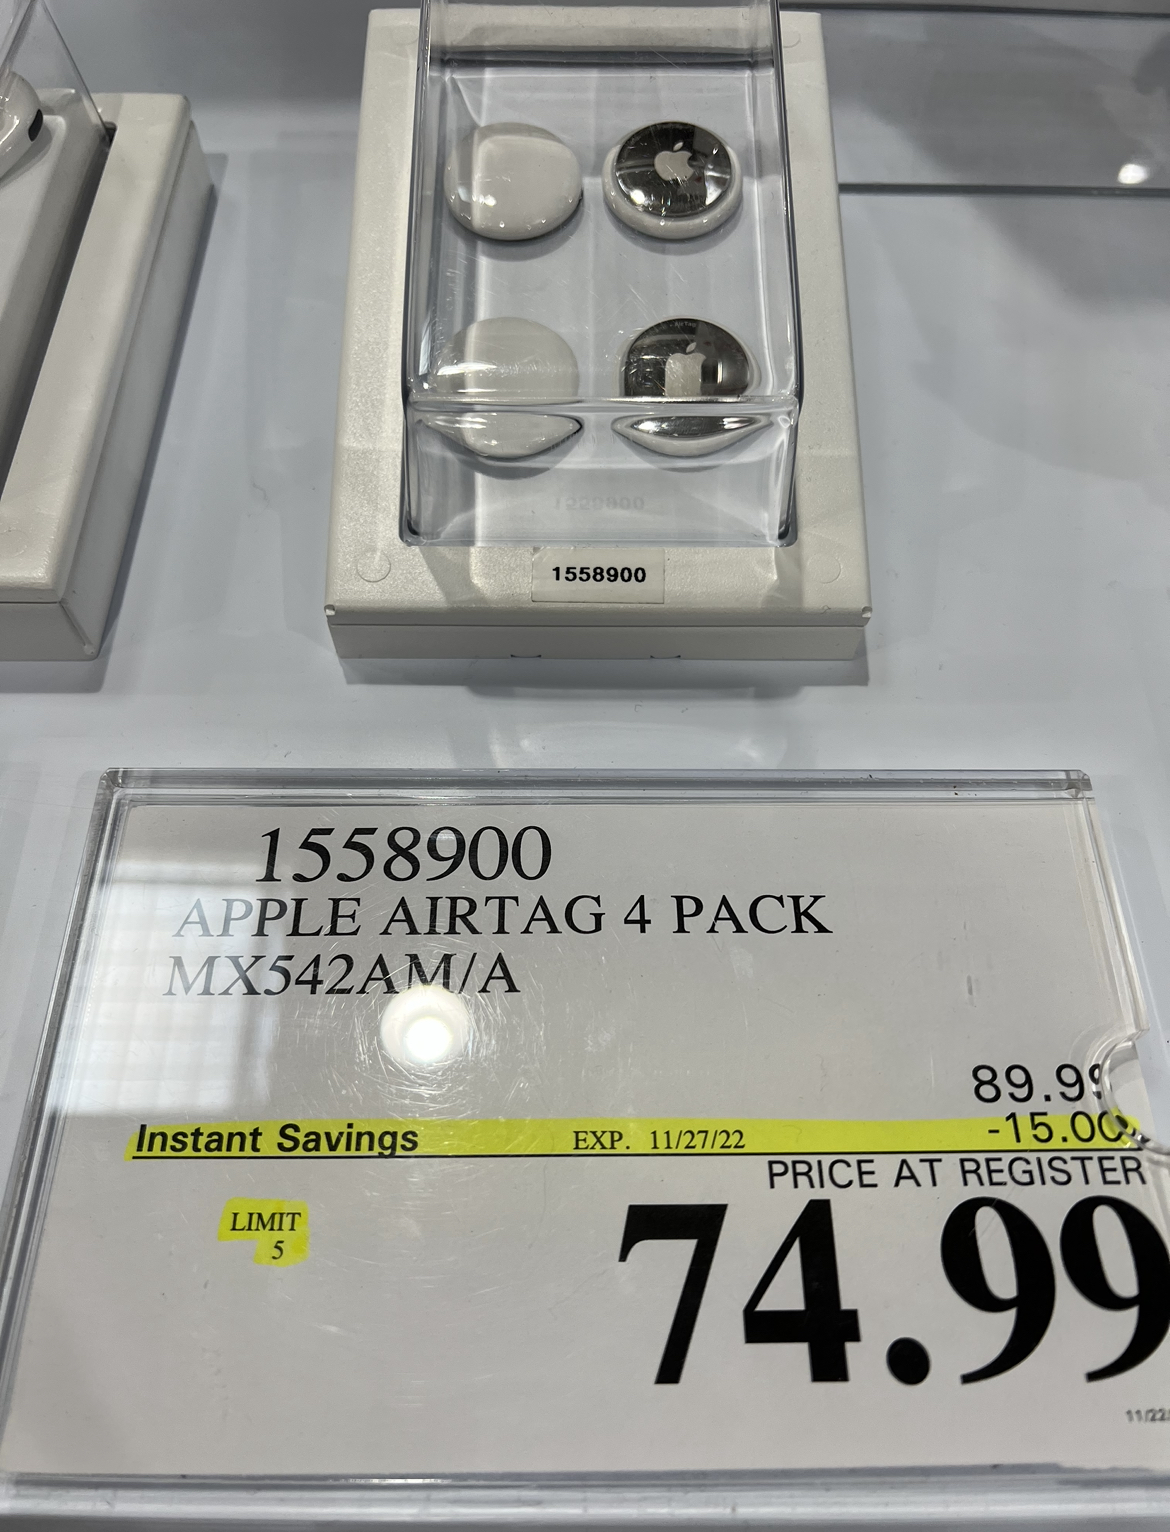 4-Pack Apple AirTag $74.95 at Costco (in store) YMMV